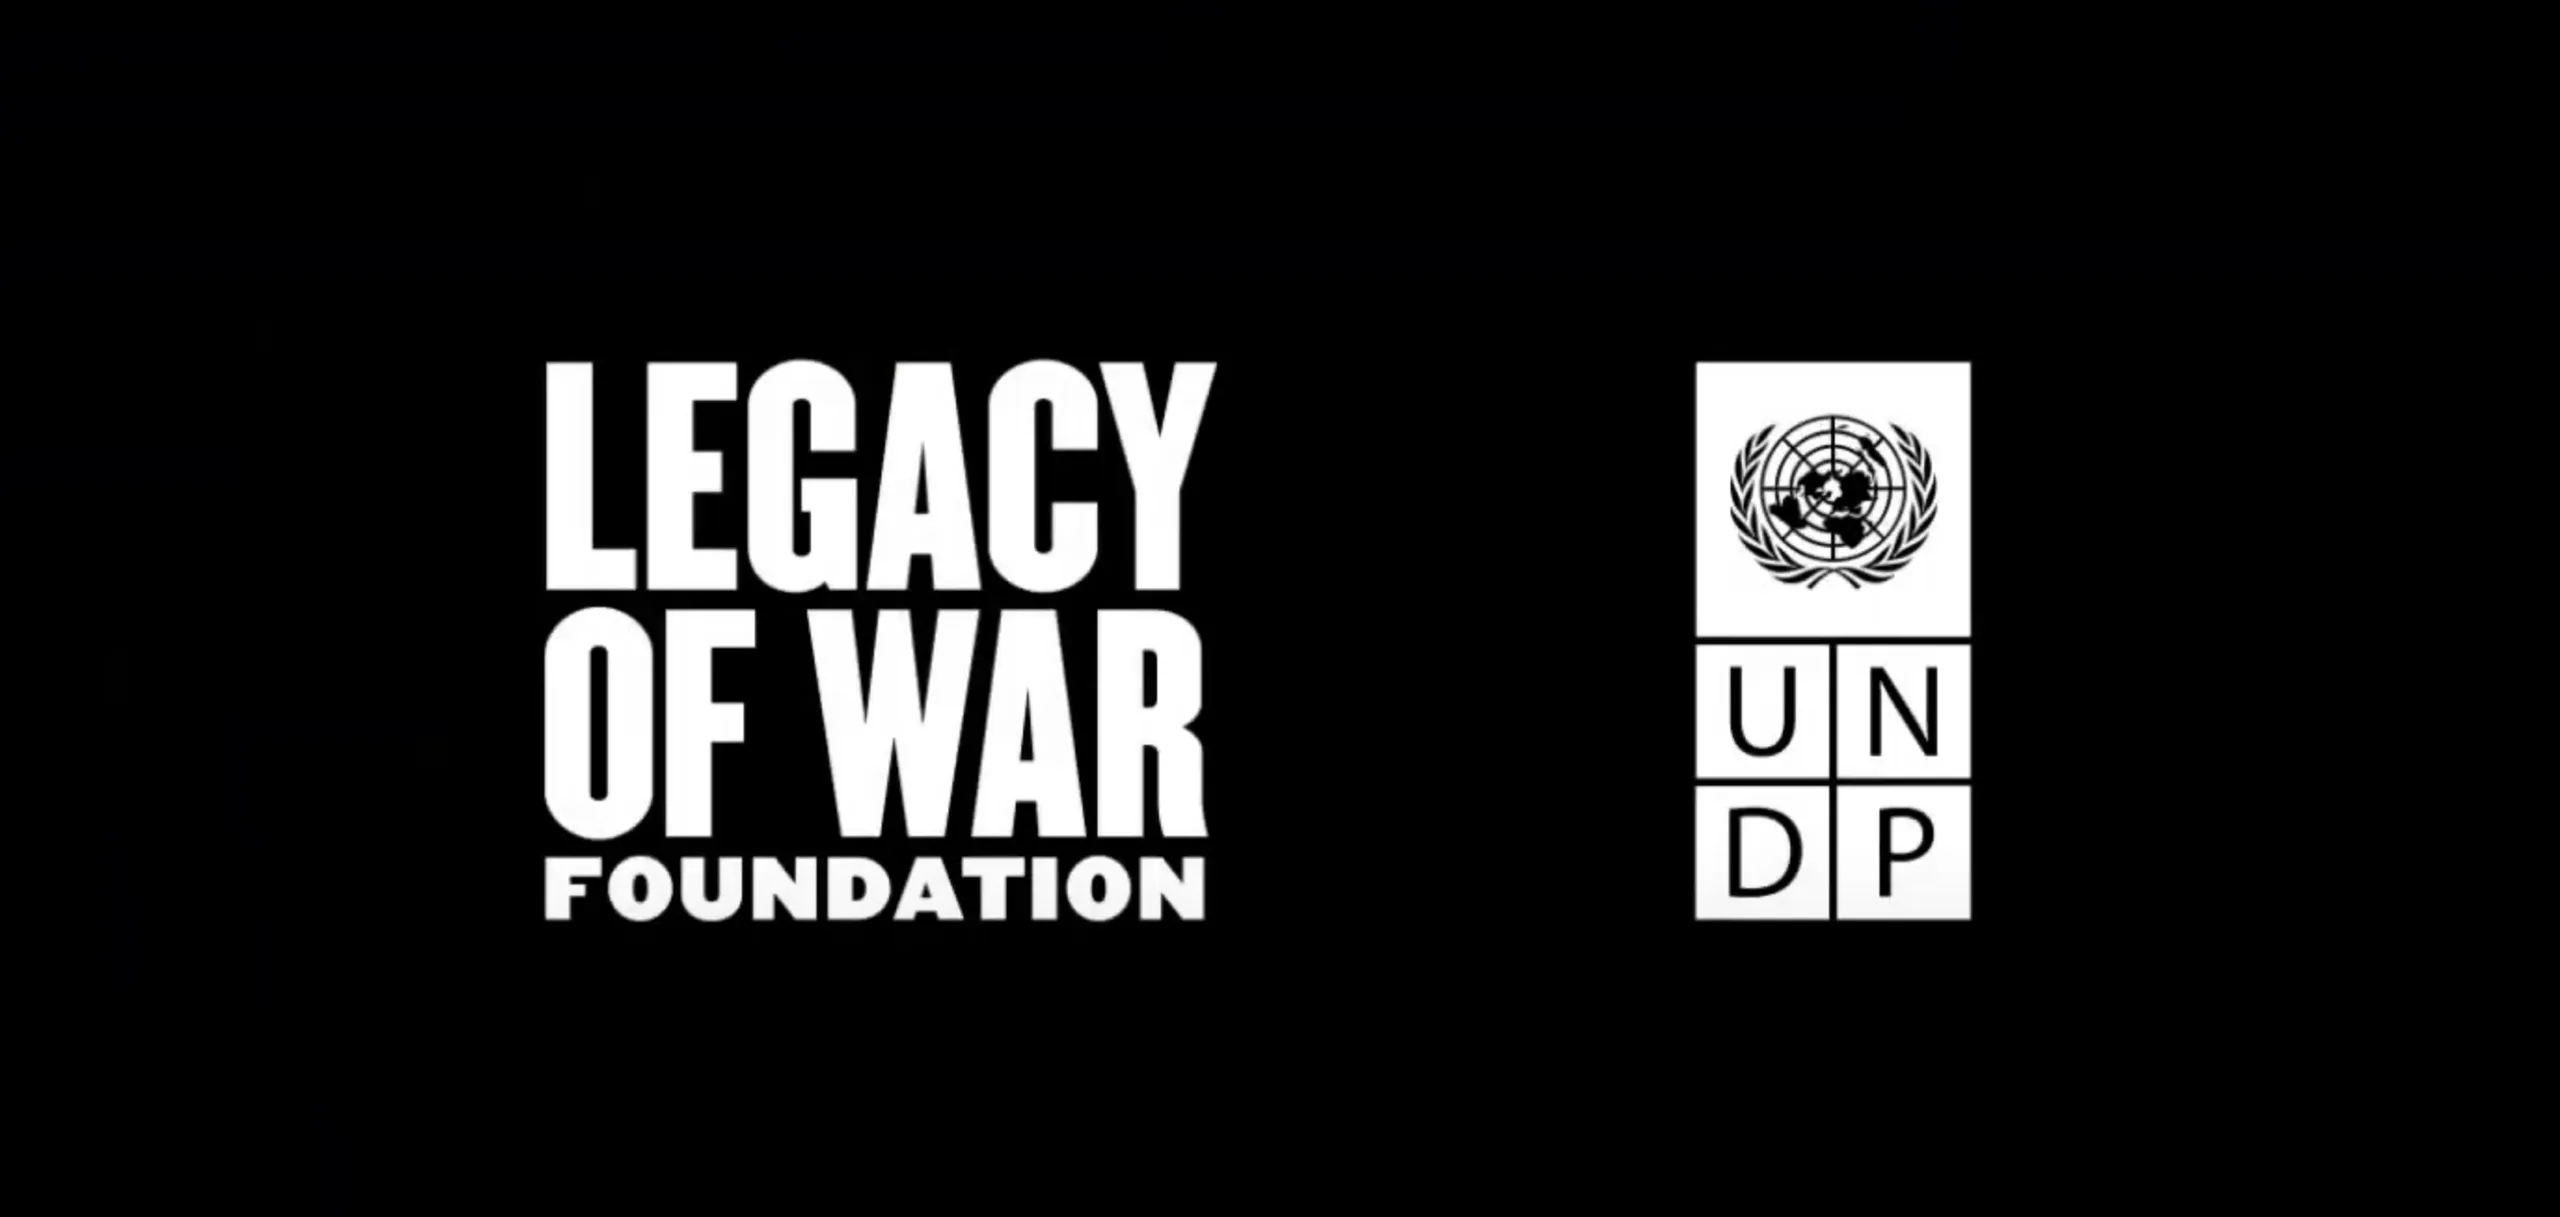 UNDP and LEGACY of War logos